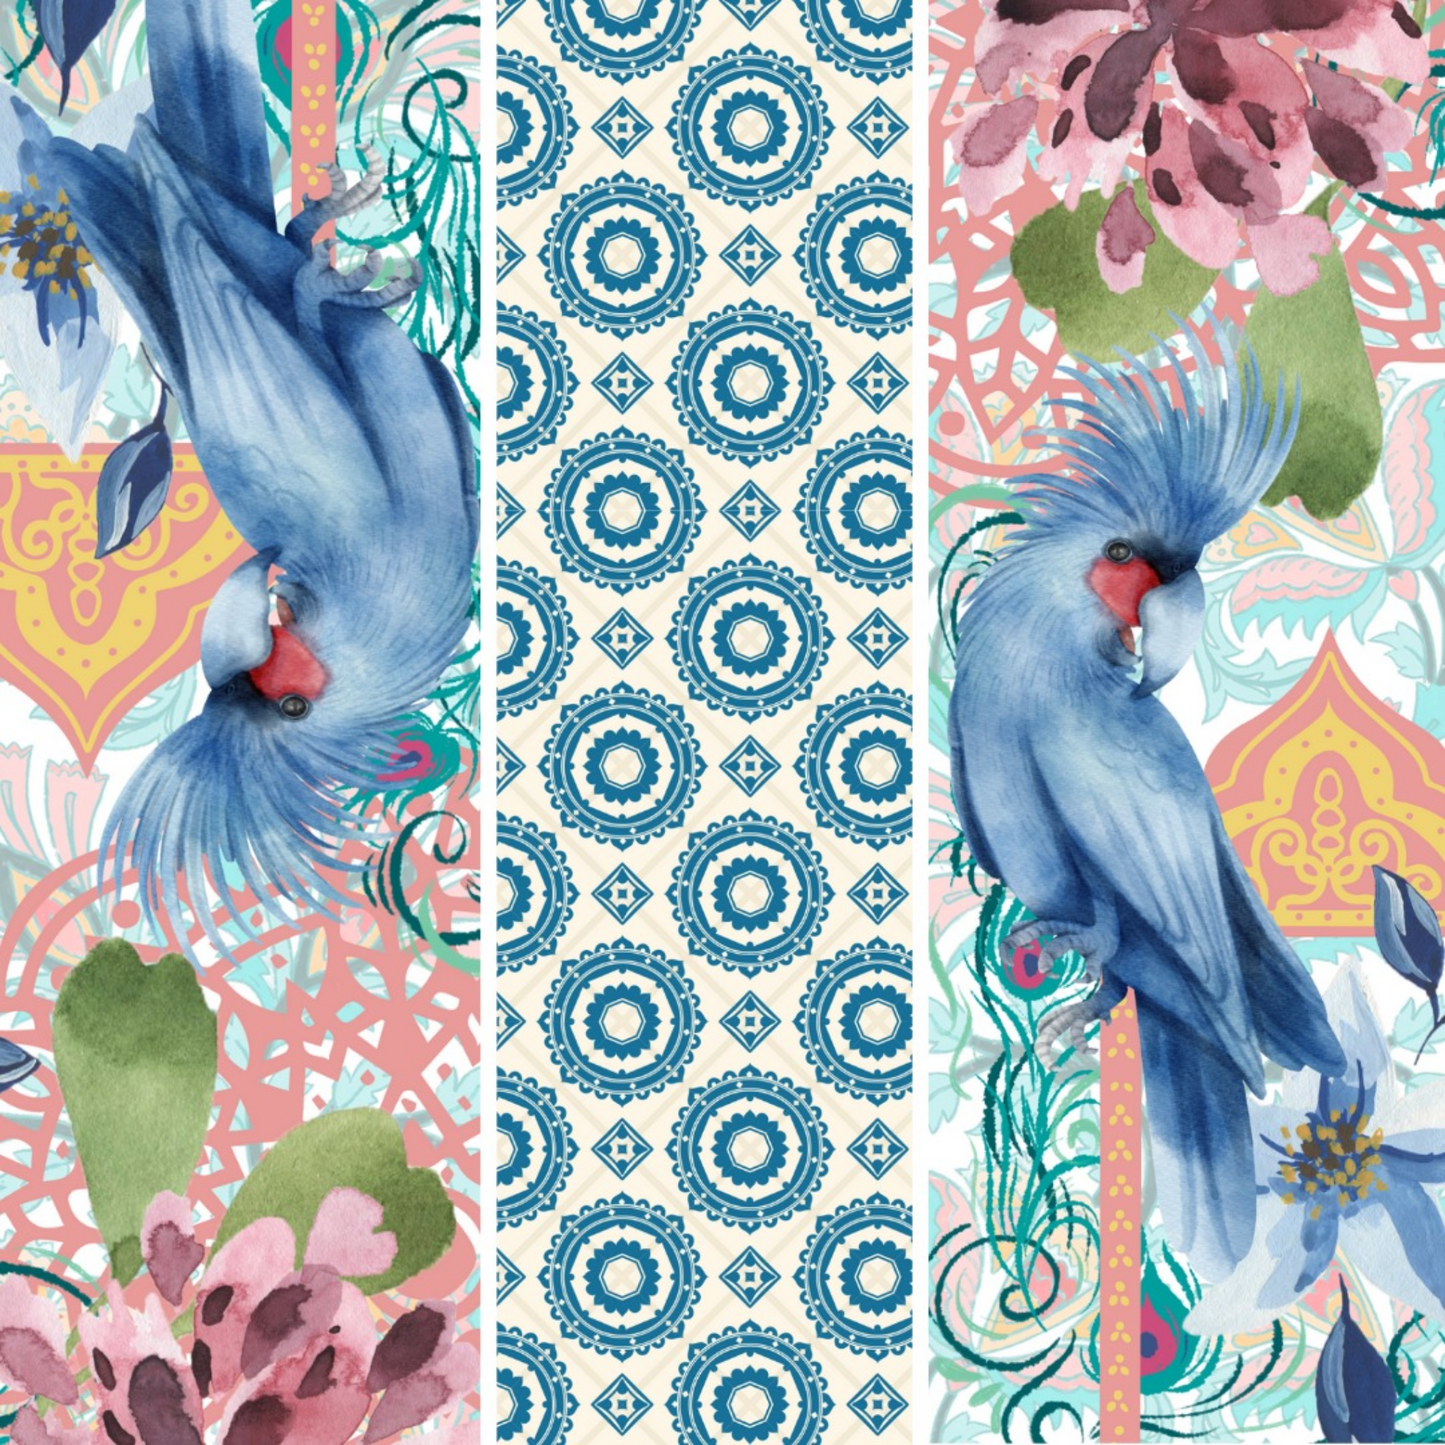 "BLue Lagoon" decoupage paper set by Made by Marley. Includes 3 coordinating size A3 sheets. Made by Marley decoupage papers are available at Milton's Daughter. Combo photo of all three sheets.